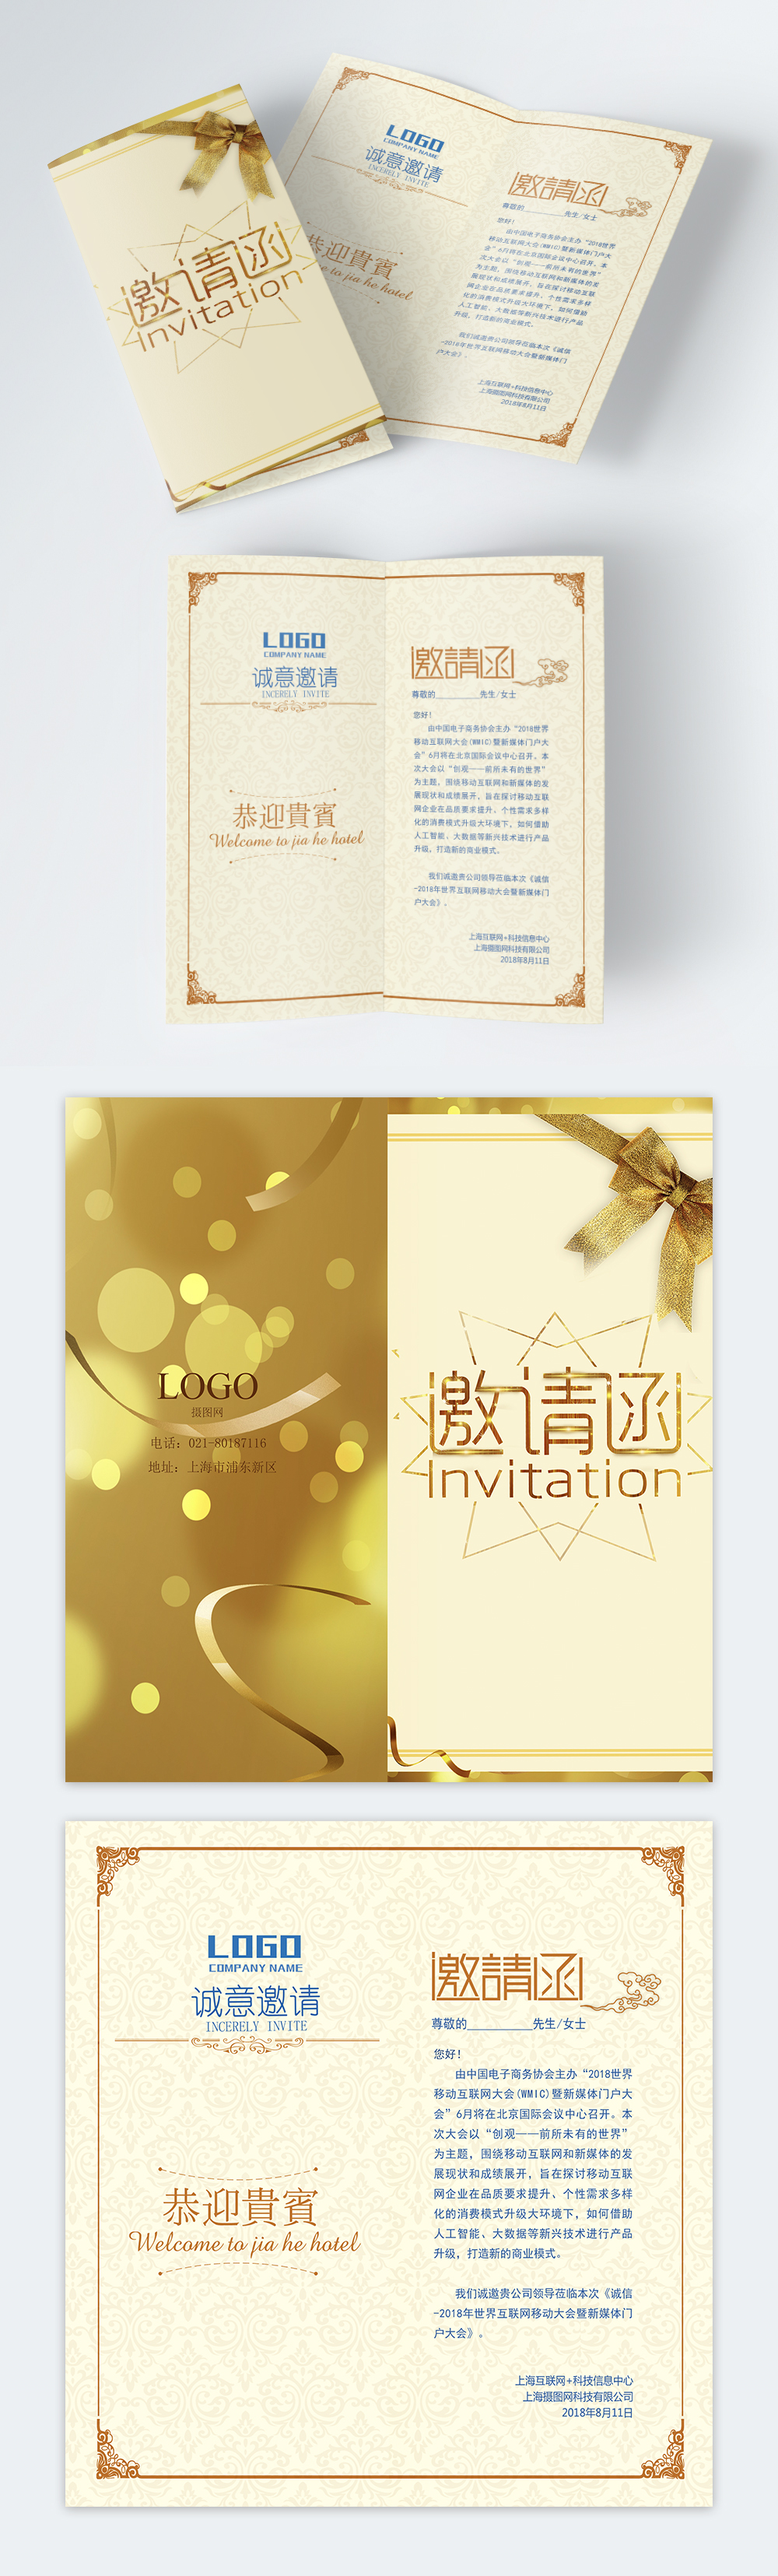 a-simple-golden-invitation-template-image-picture-free-download-400251513-lovepik